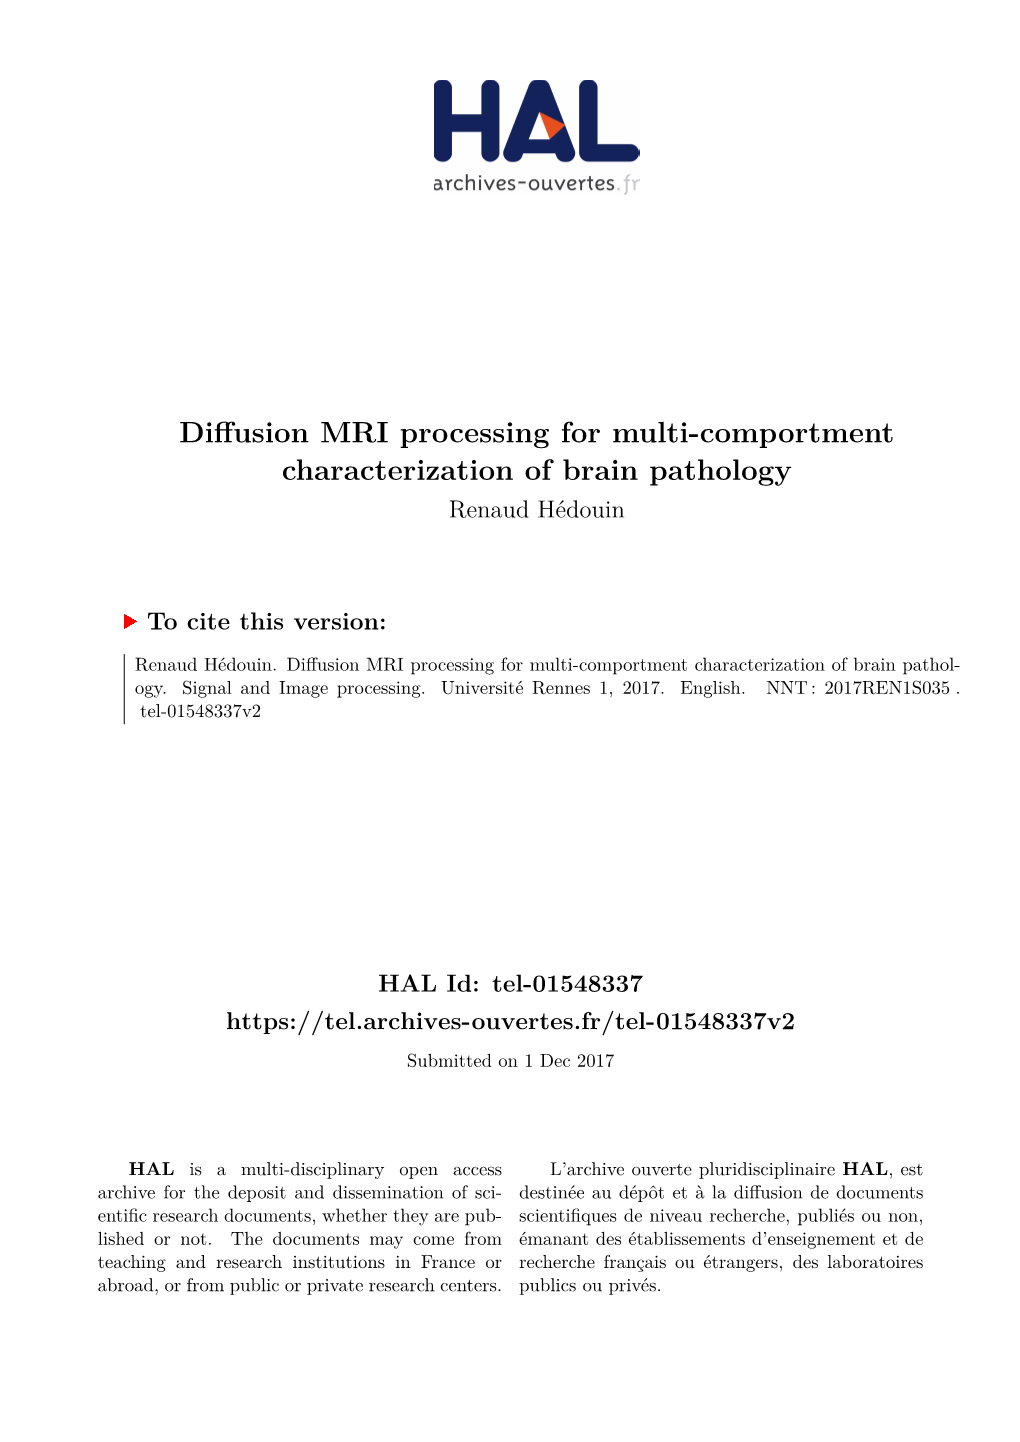 Diffusion MRI Processing for Multi-Comportment Characterization of Brain Pathology Renaud Hédouin